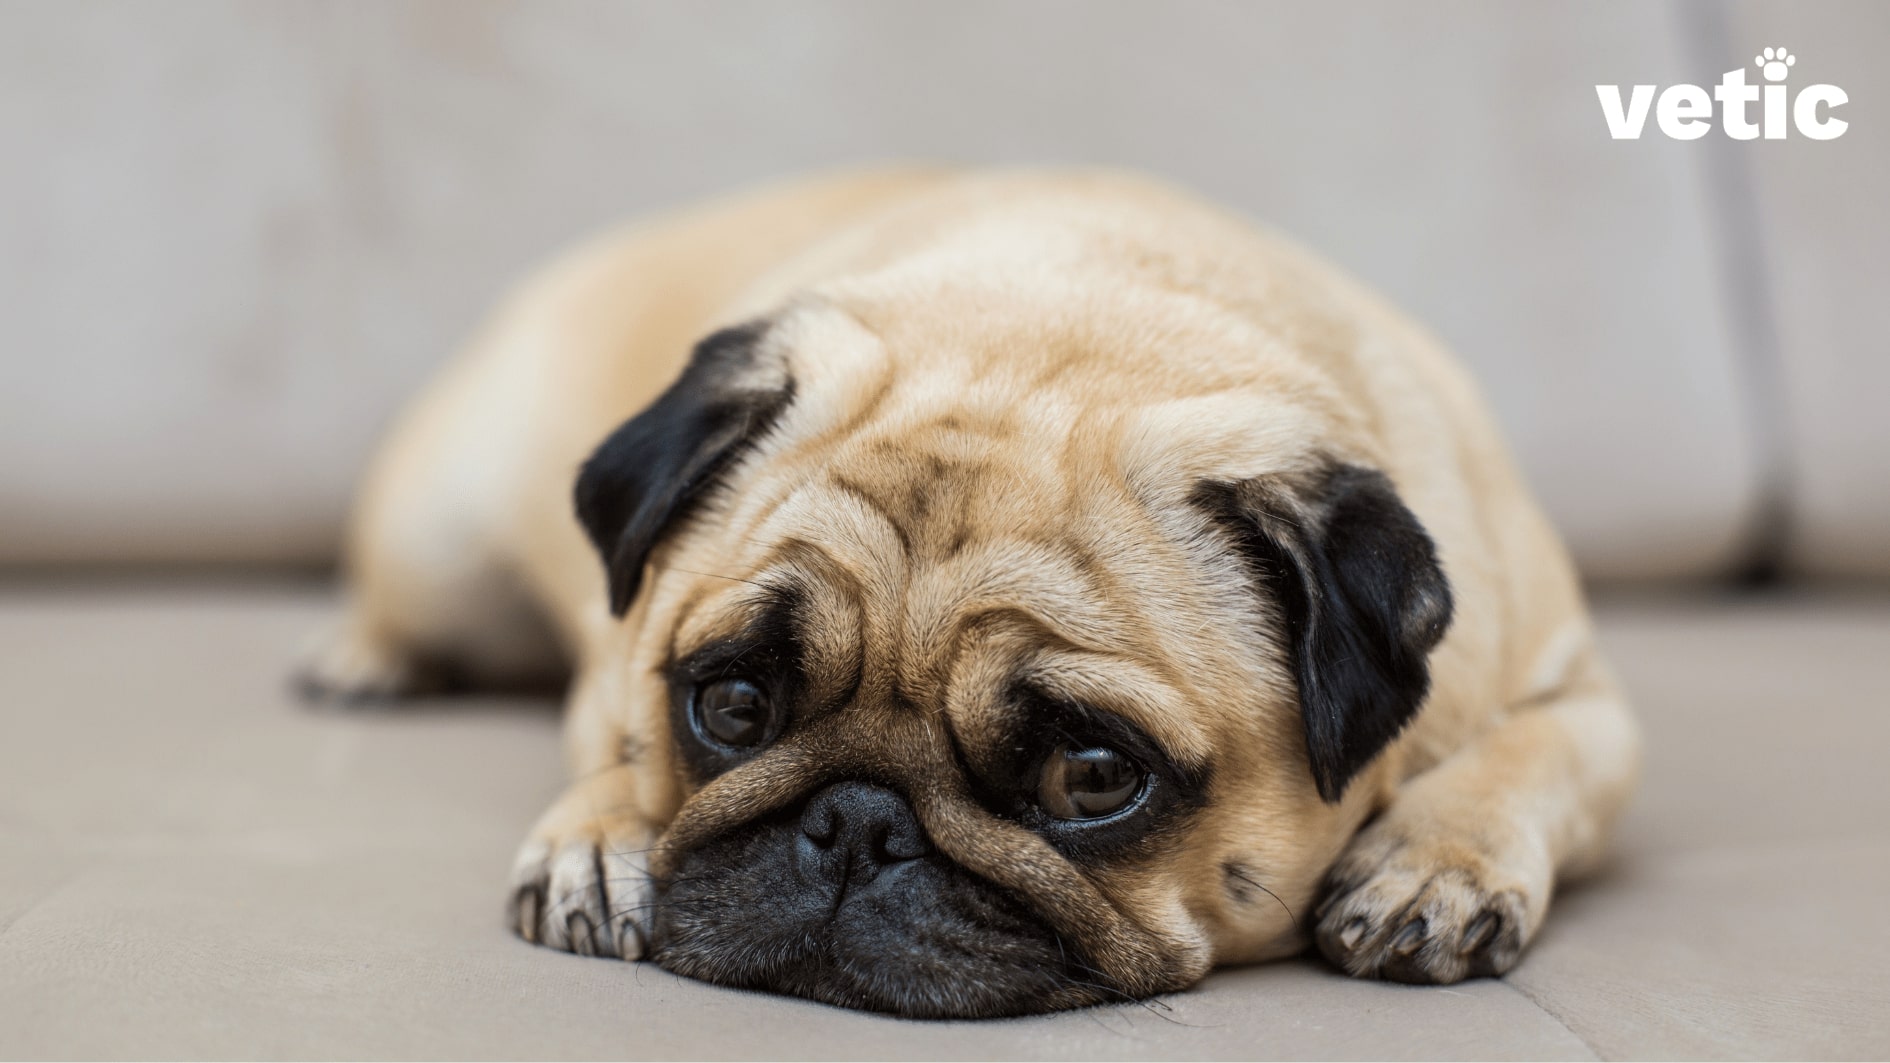 Sad pug lying with face between his paws, can be a sign of anxiety in dogs